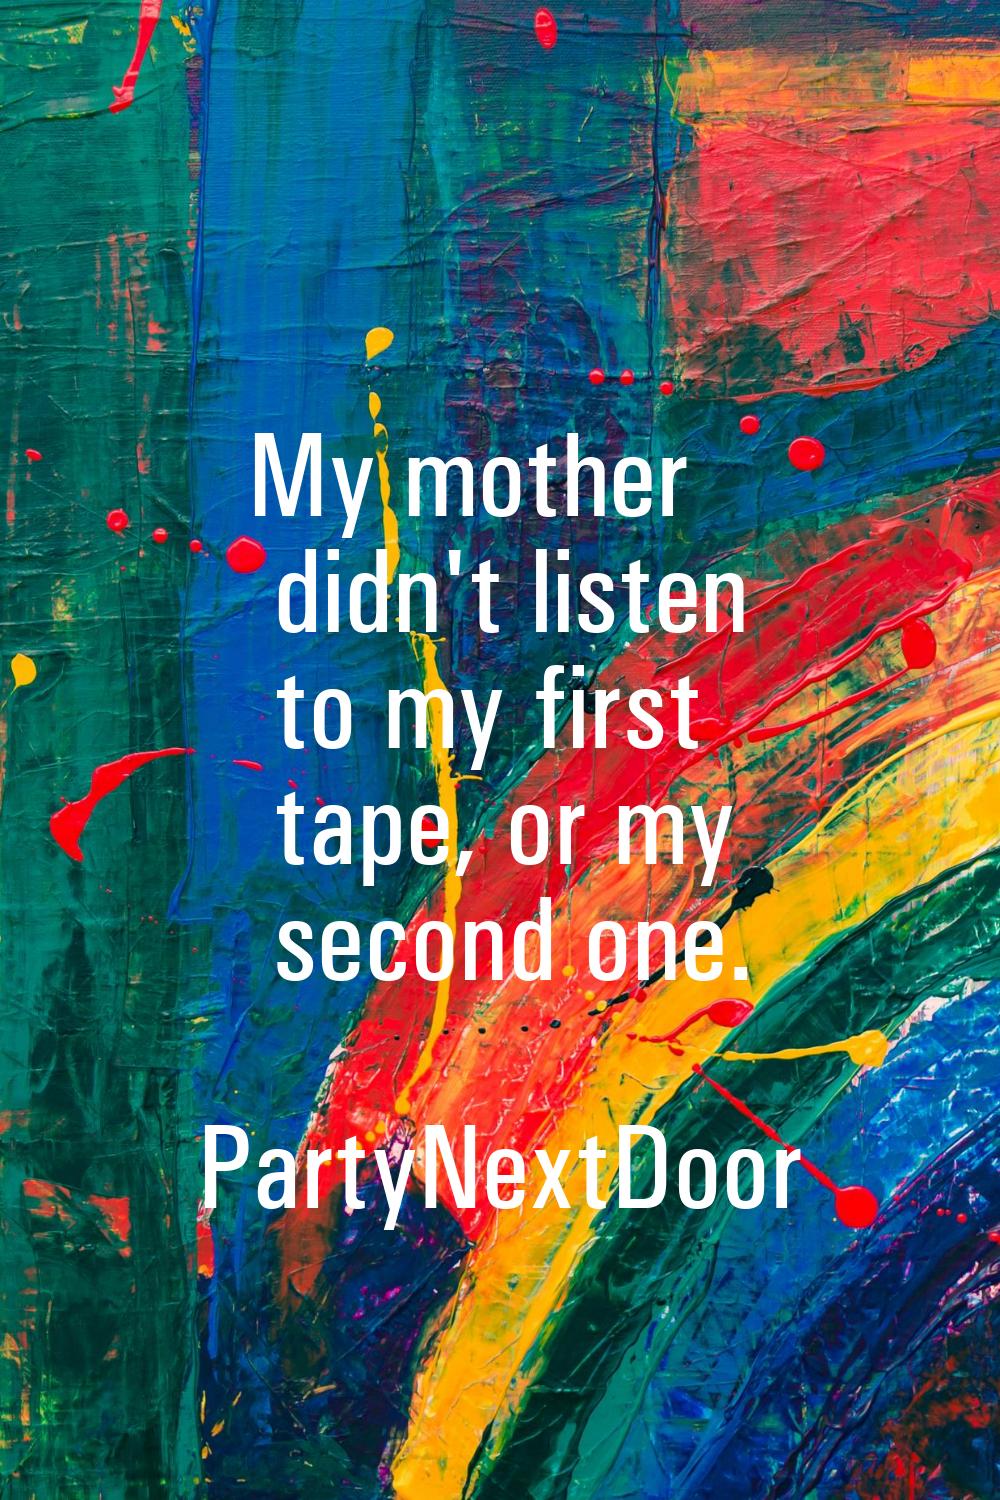 My mother didn't listen to my first tape, or my second one.